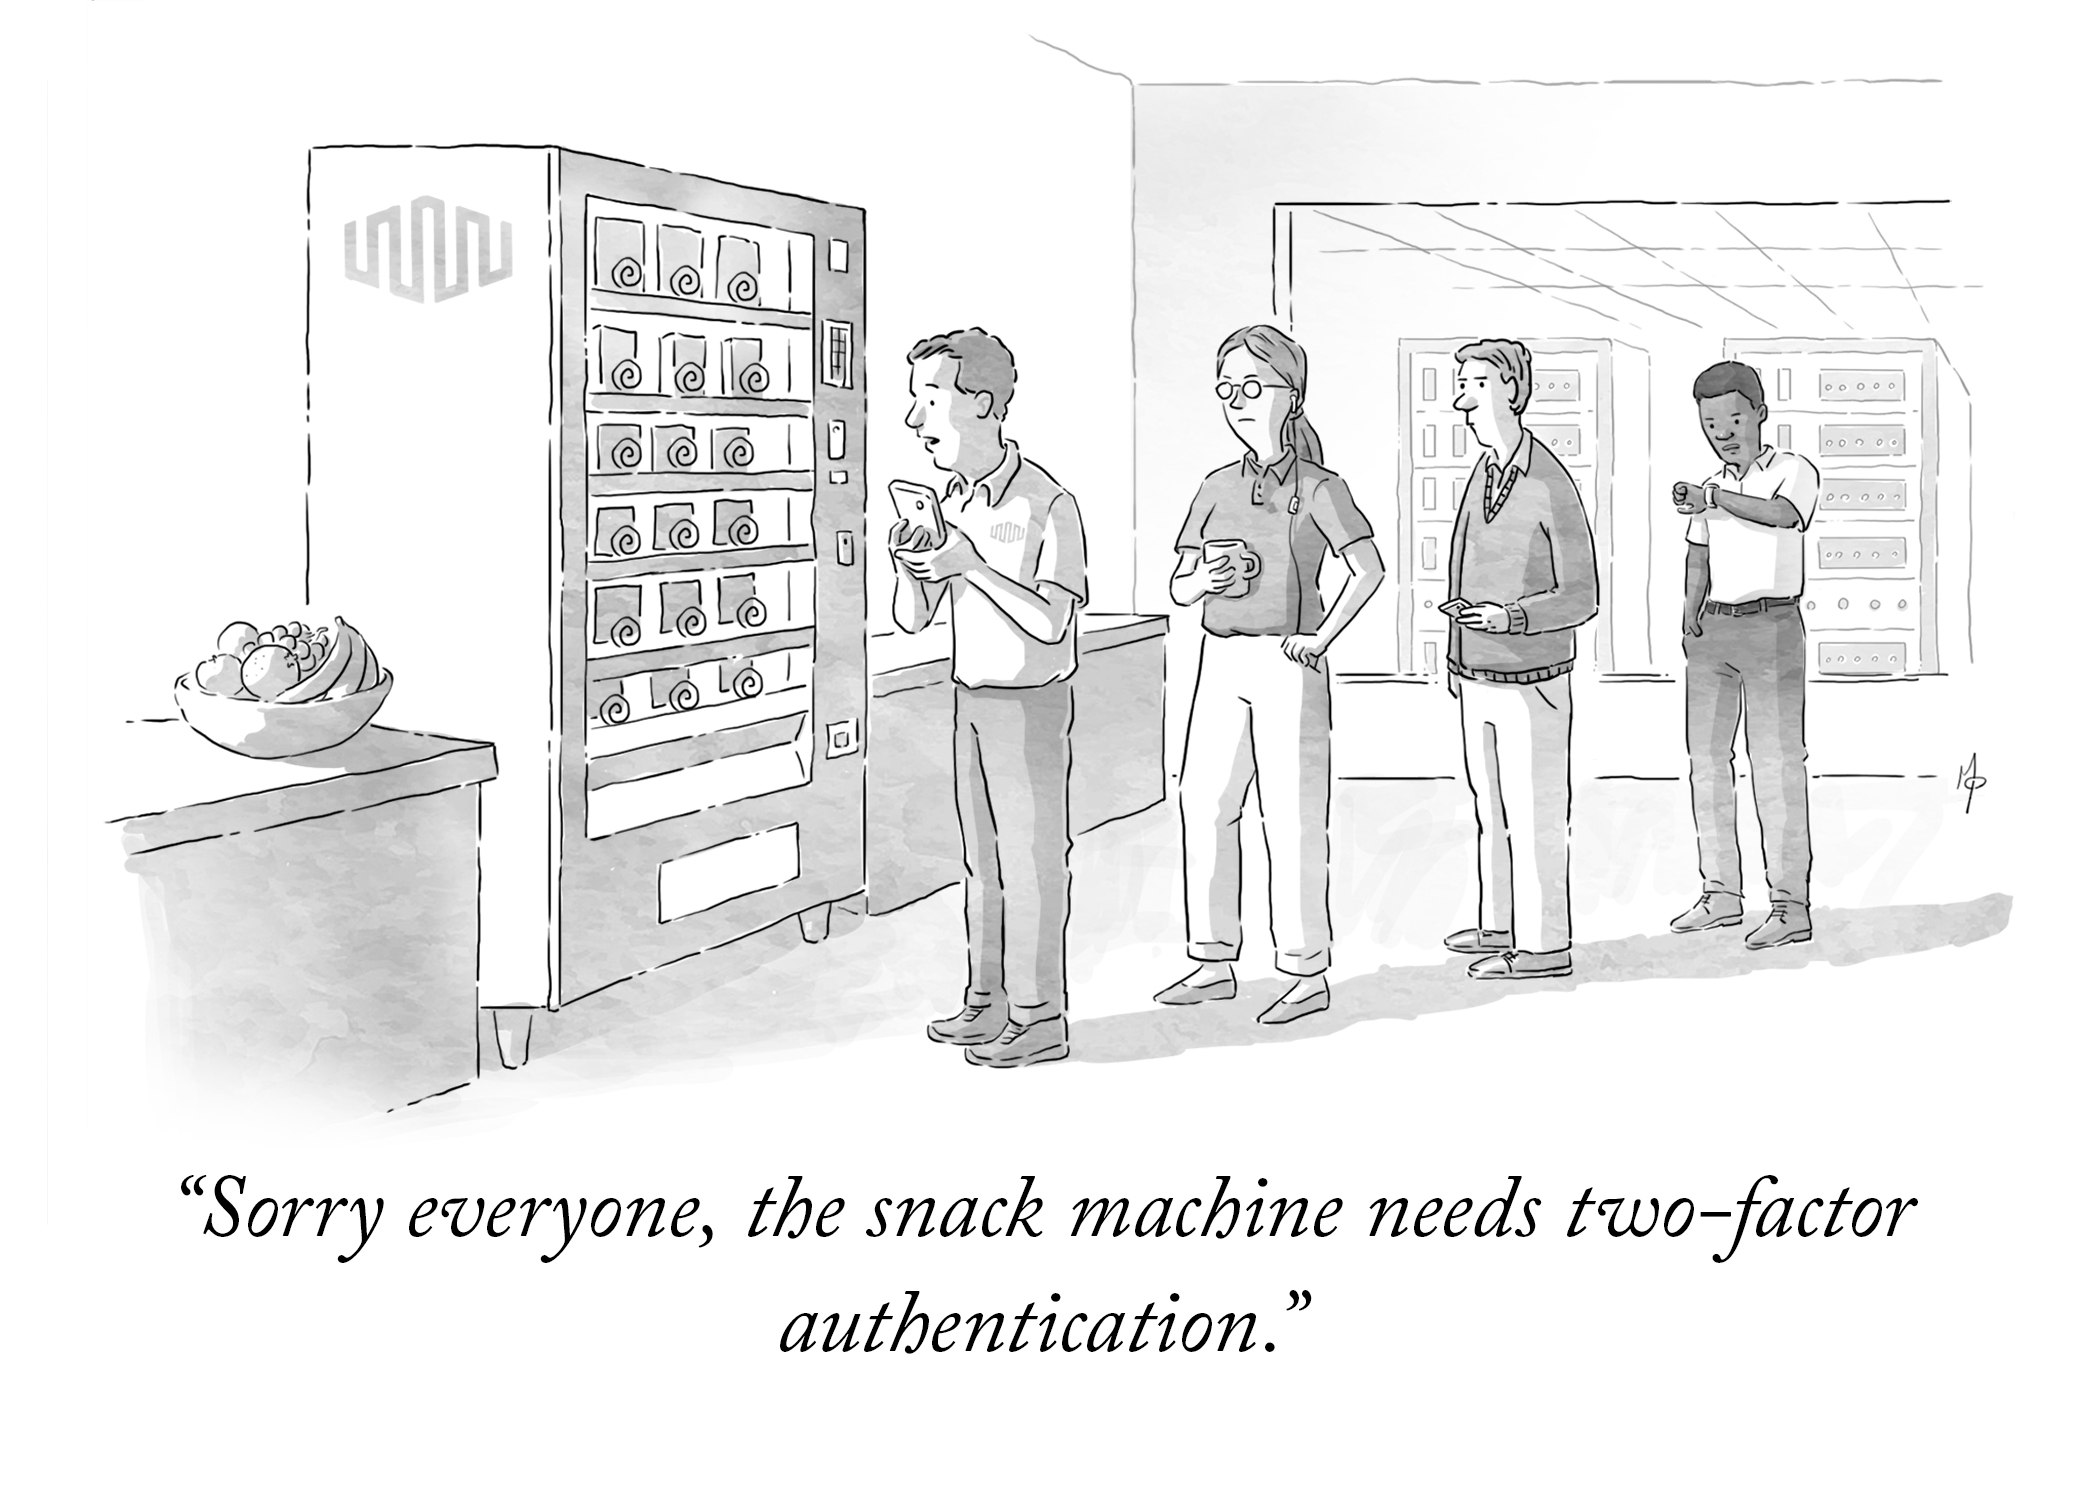 New Yorker style illustration. A line of people are waiting to use an office vending machine. The caption reads: Sorry everyone, the snack machine needs two-factor authentication.